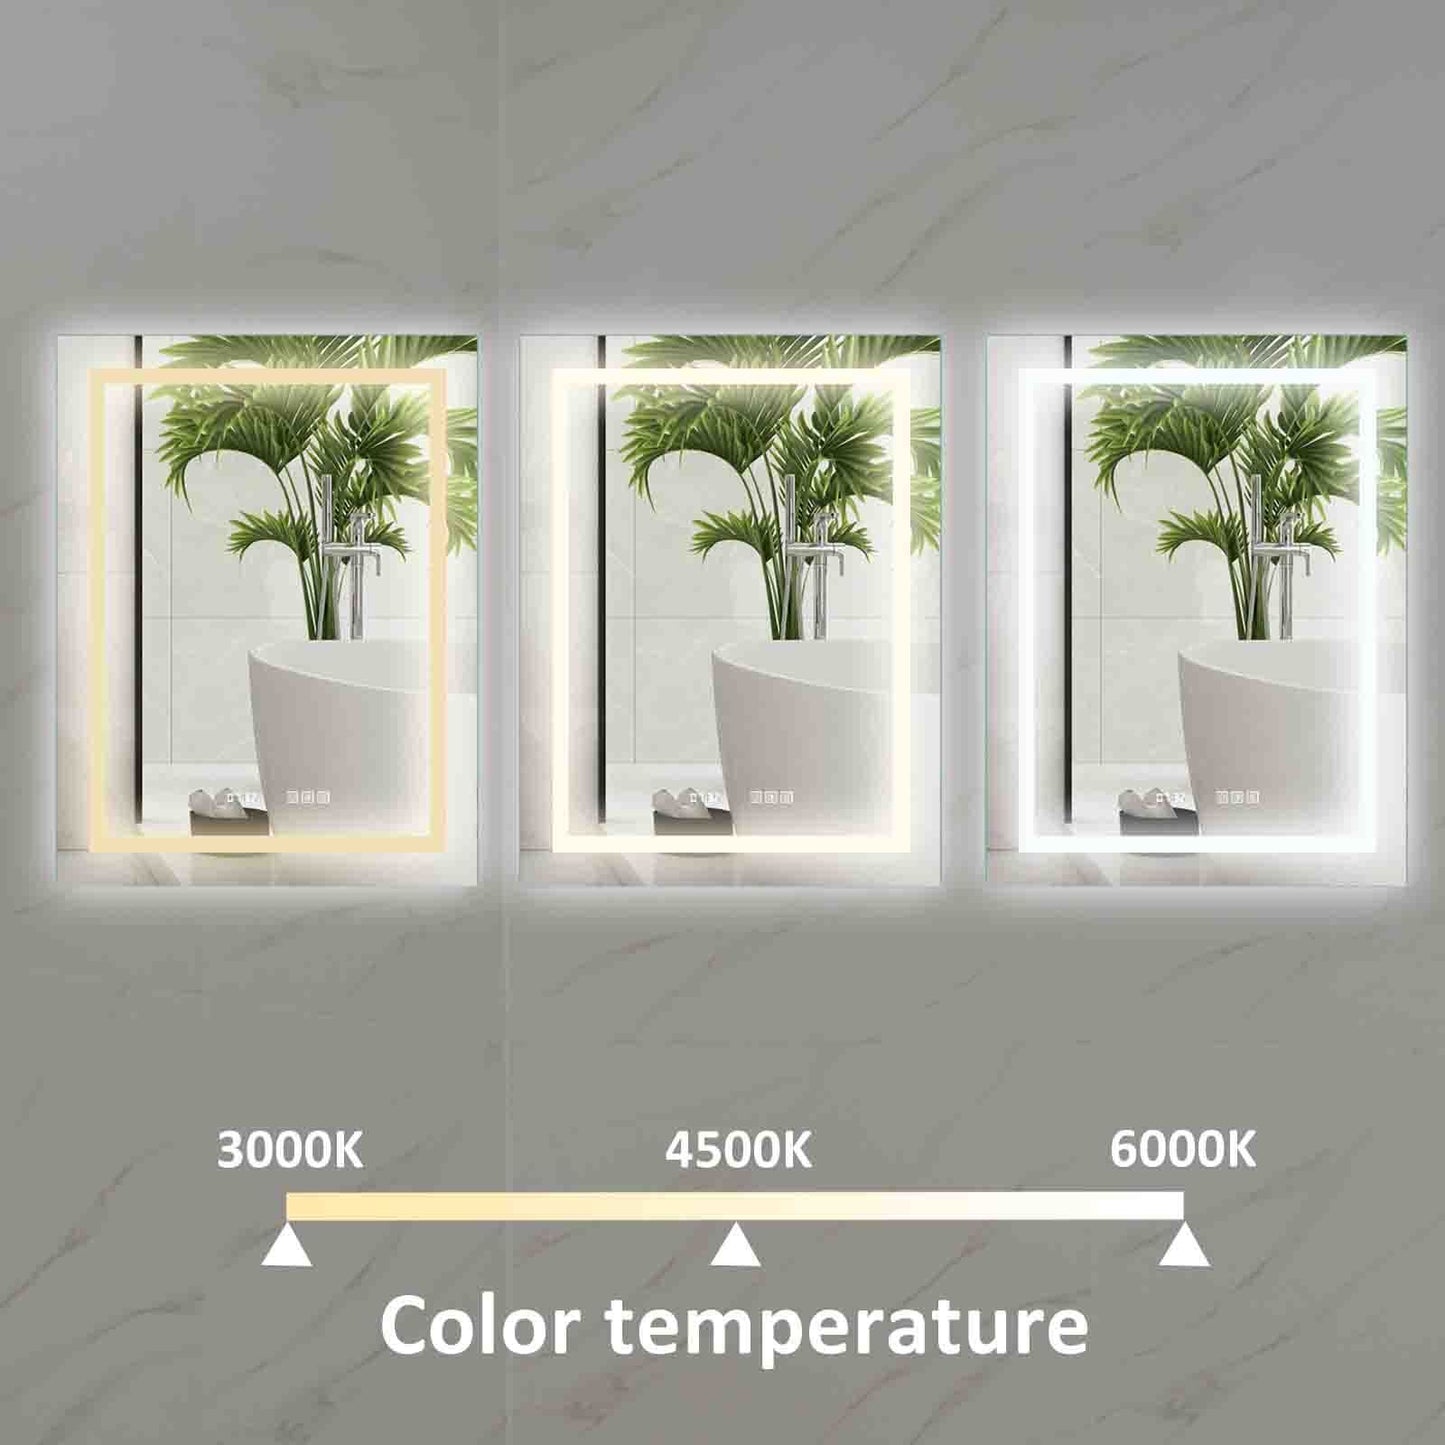 LED Bathroom Vanity Mirror, 36 x 28 inch, Anti Fog, Night Light, Time,Temperature,Dimmable,Color Temper 3000K-6400K,90+ CRI,Vertical Wall Mounted Only